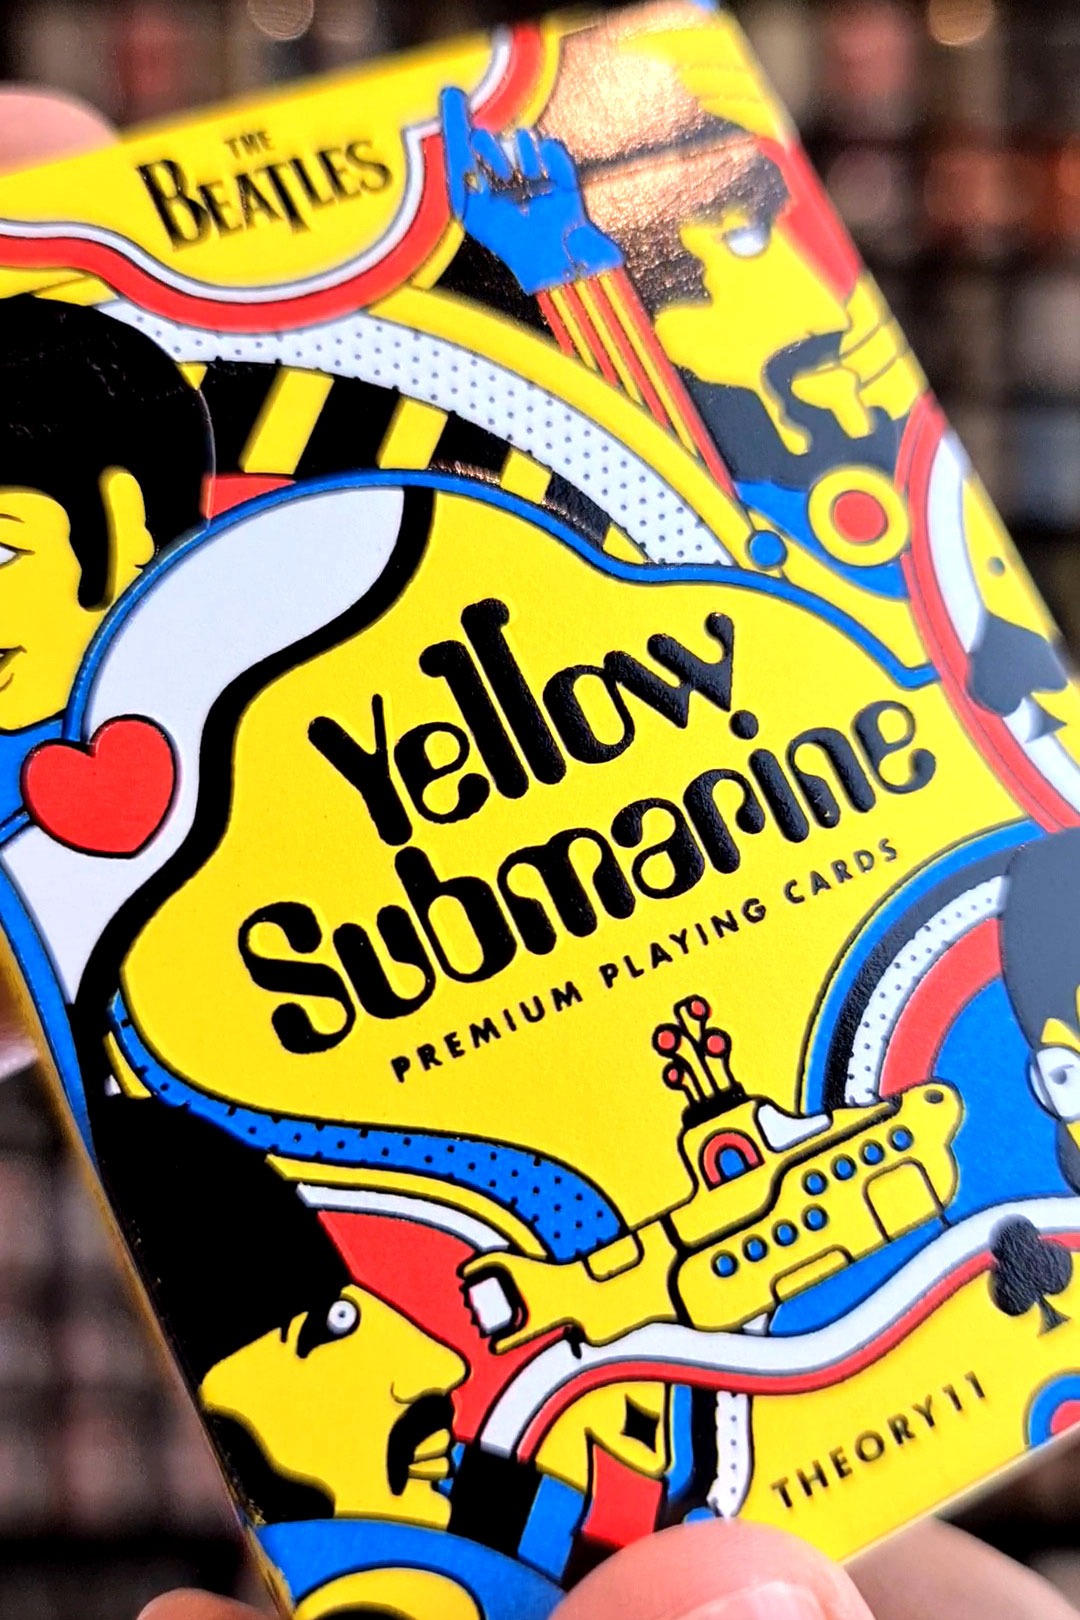 The Bealtes Yellow Submarine Playing Cards